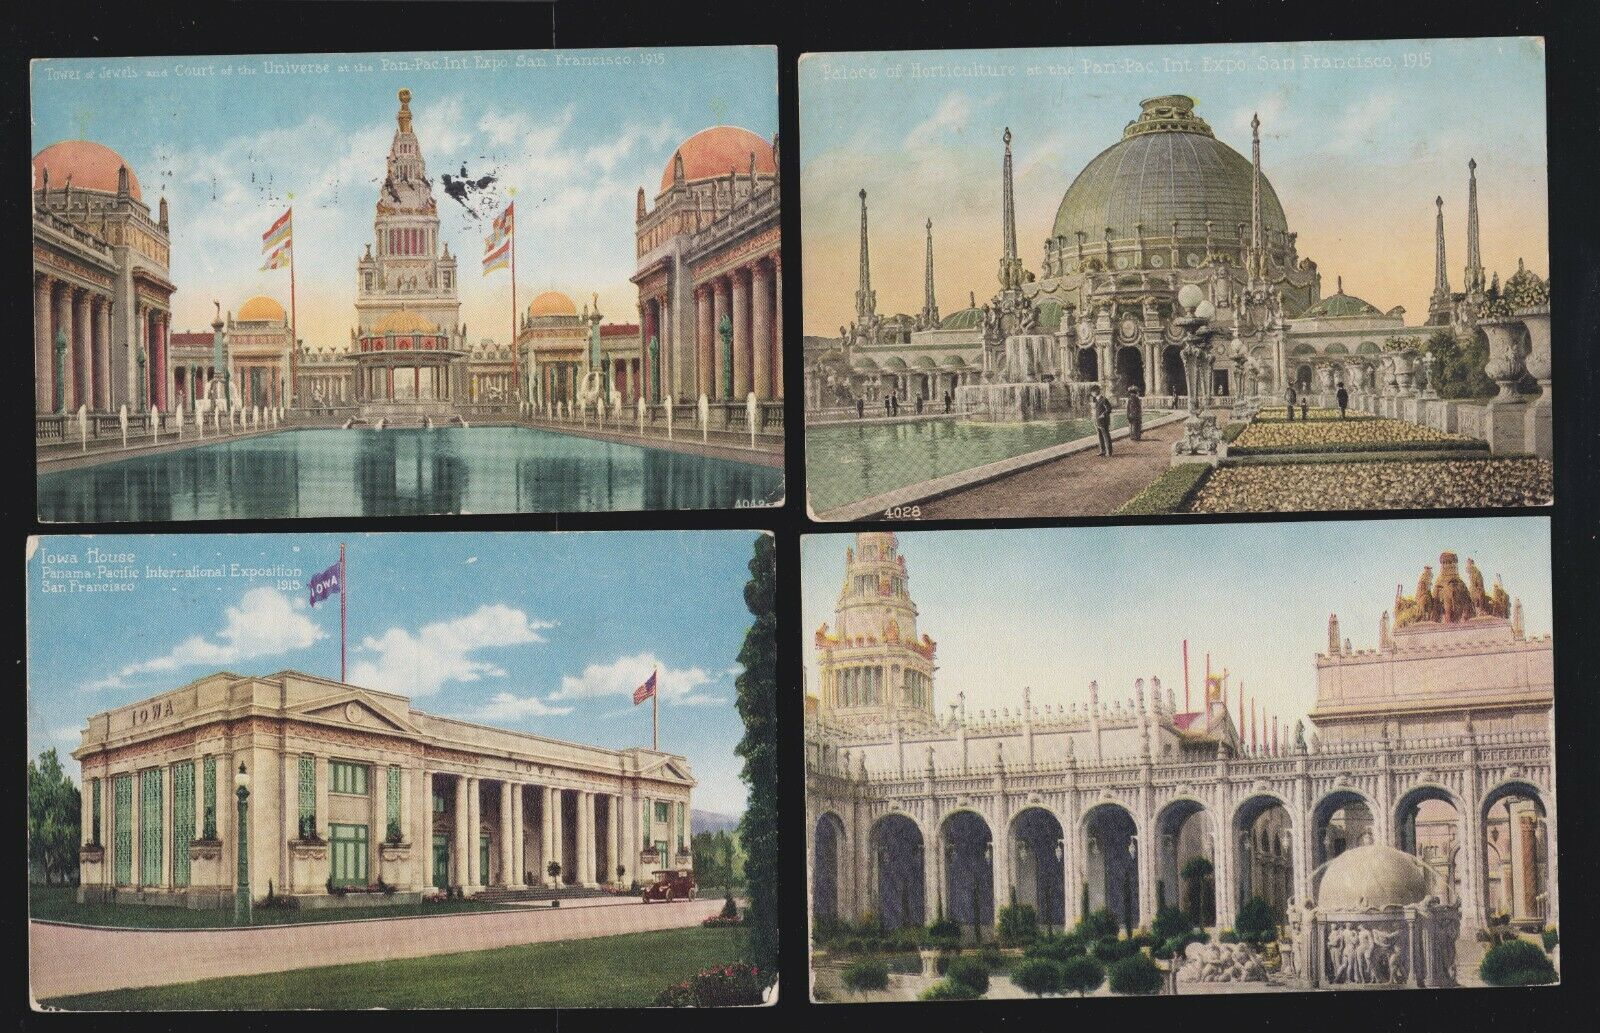 Us 1915  Pan-pacific International Expo Postcards Lot Of 4 (ppie16)